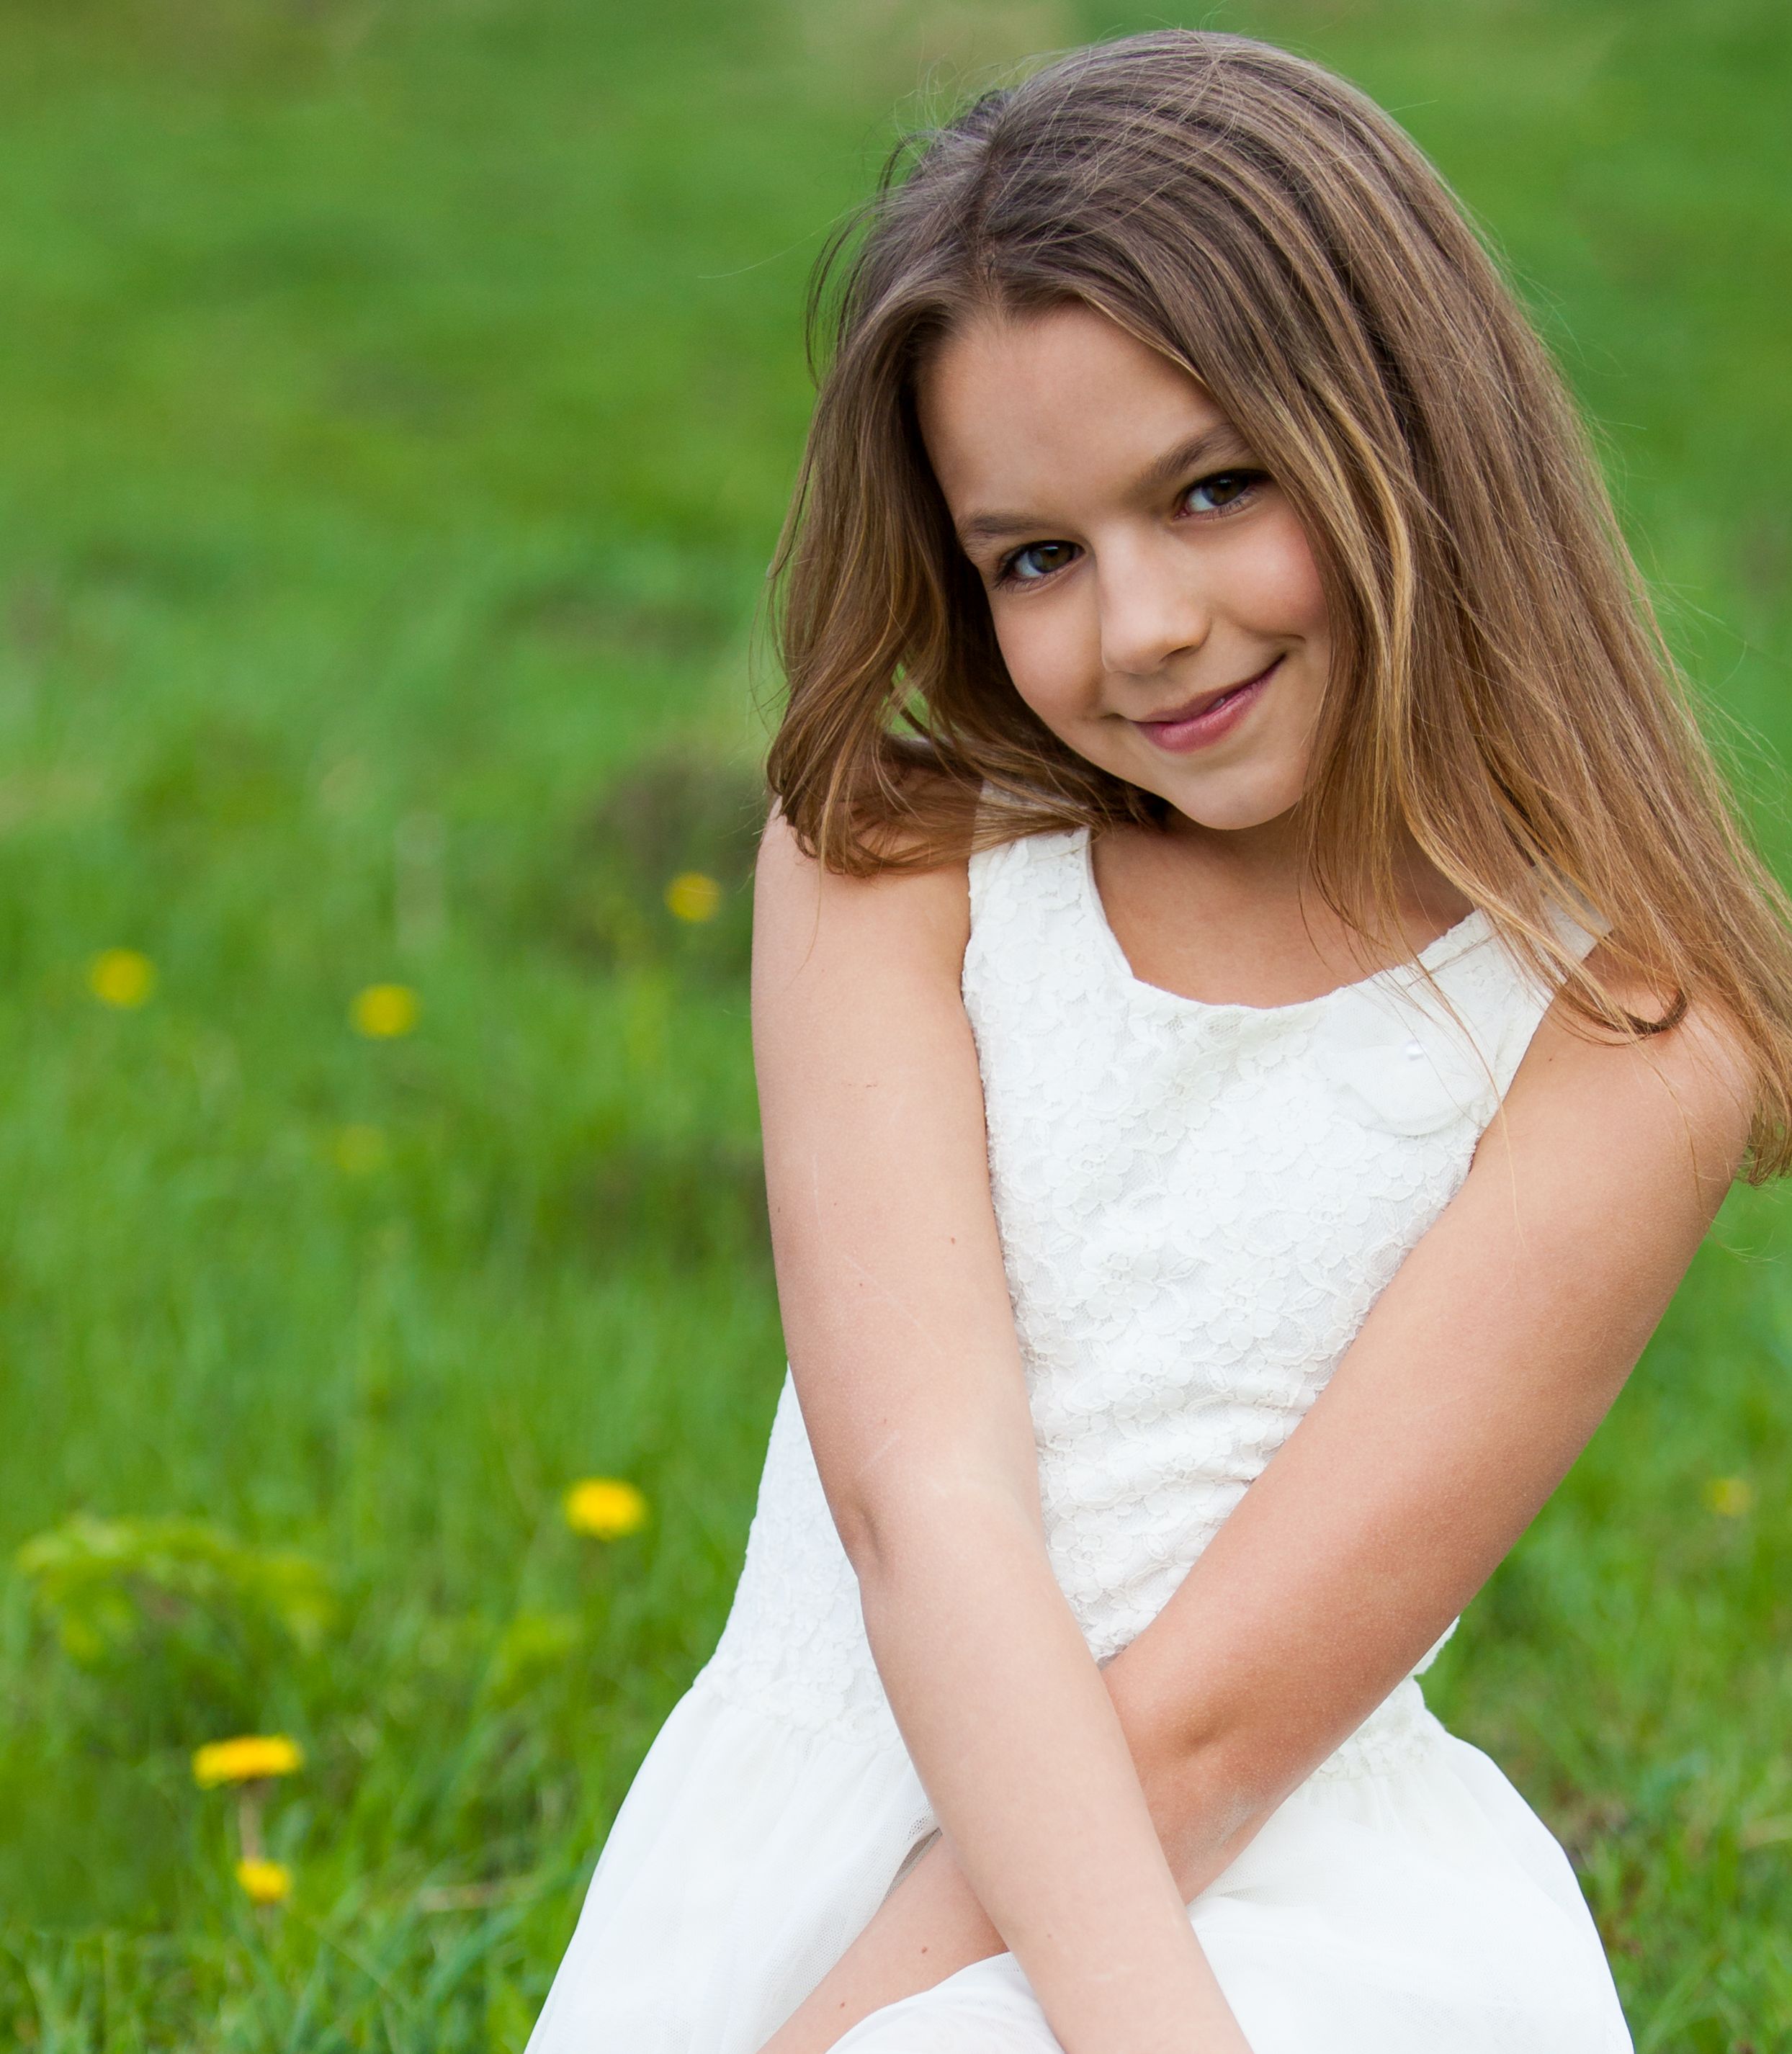 Photo Of A Cute 12 Year Old Girl Photographed In May 2015 Picture 20 Erofound